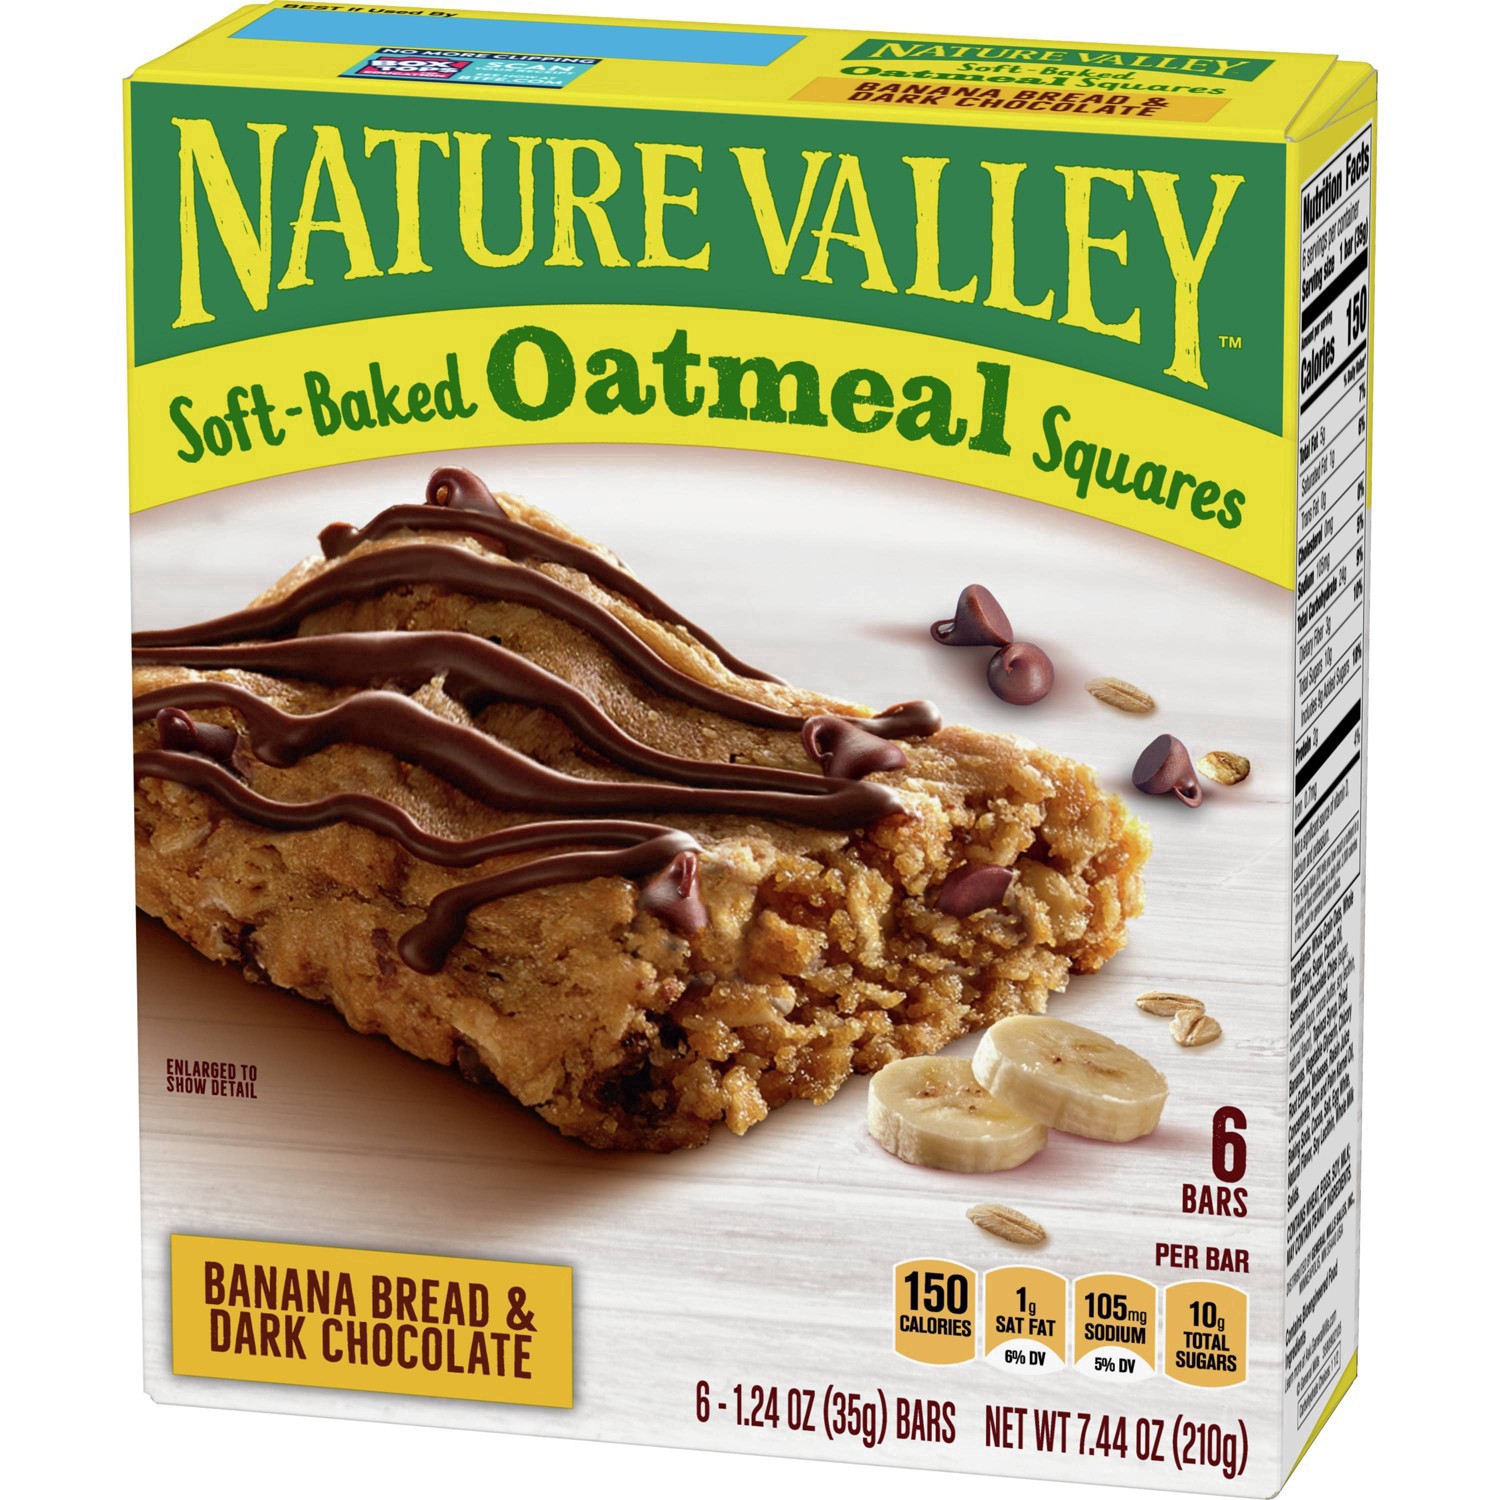 slide 55 of 101, Nature Valley Soft-Baked Oatmeal Squares, Banana Bread & Dark Chocolate, 6 ct, 6 ct